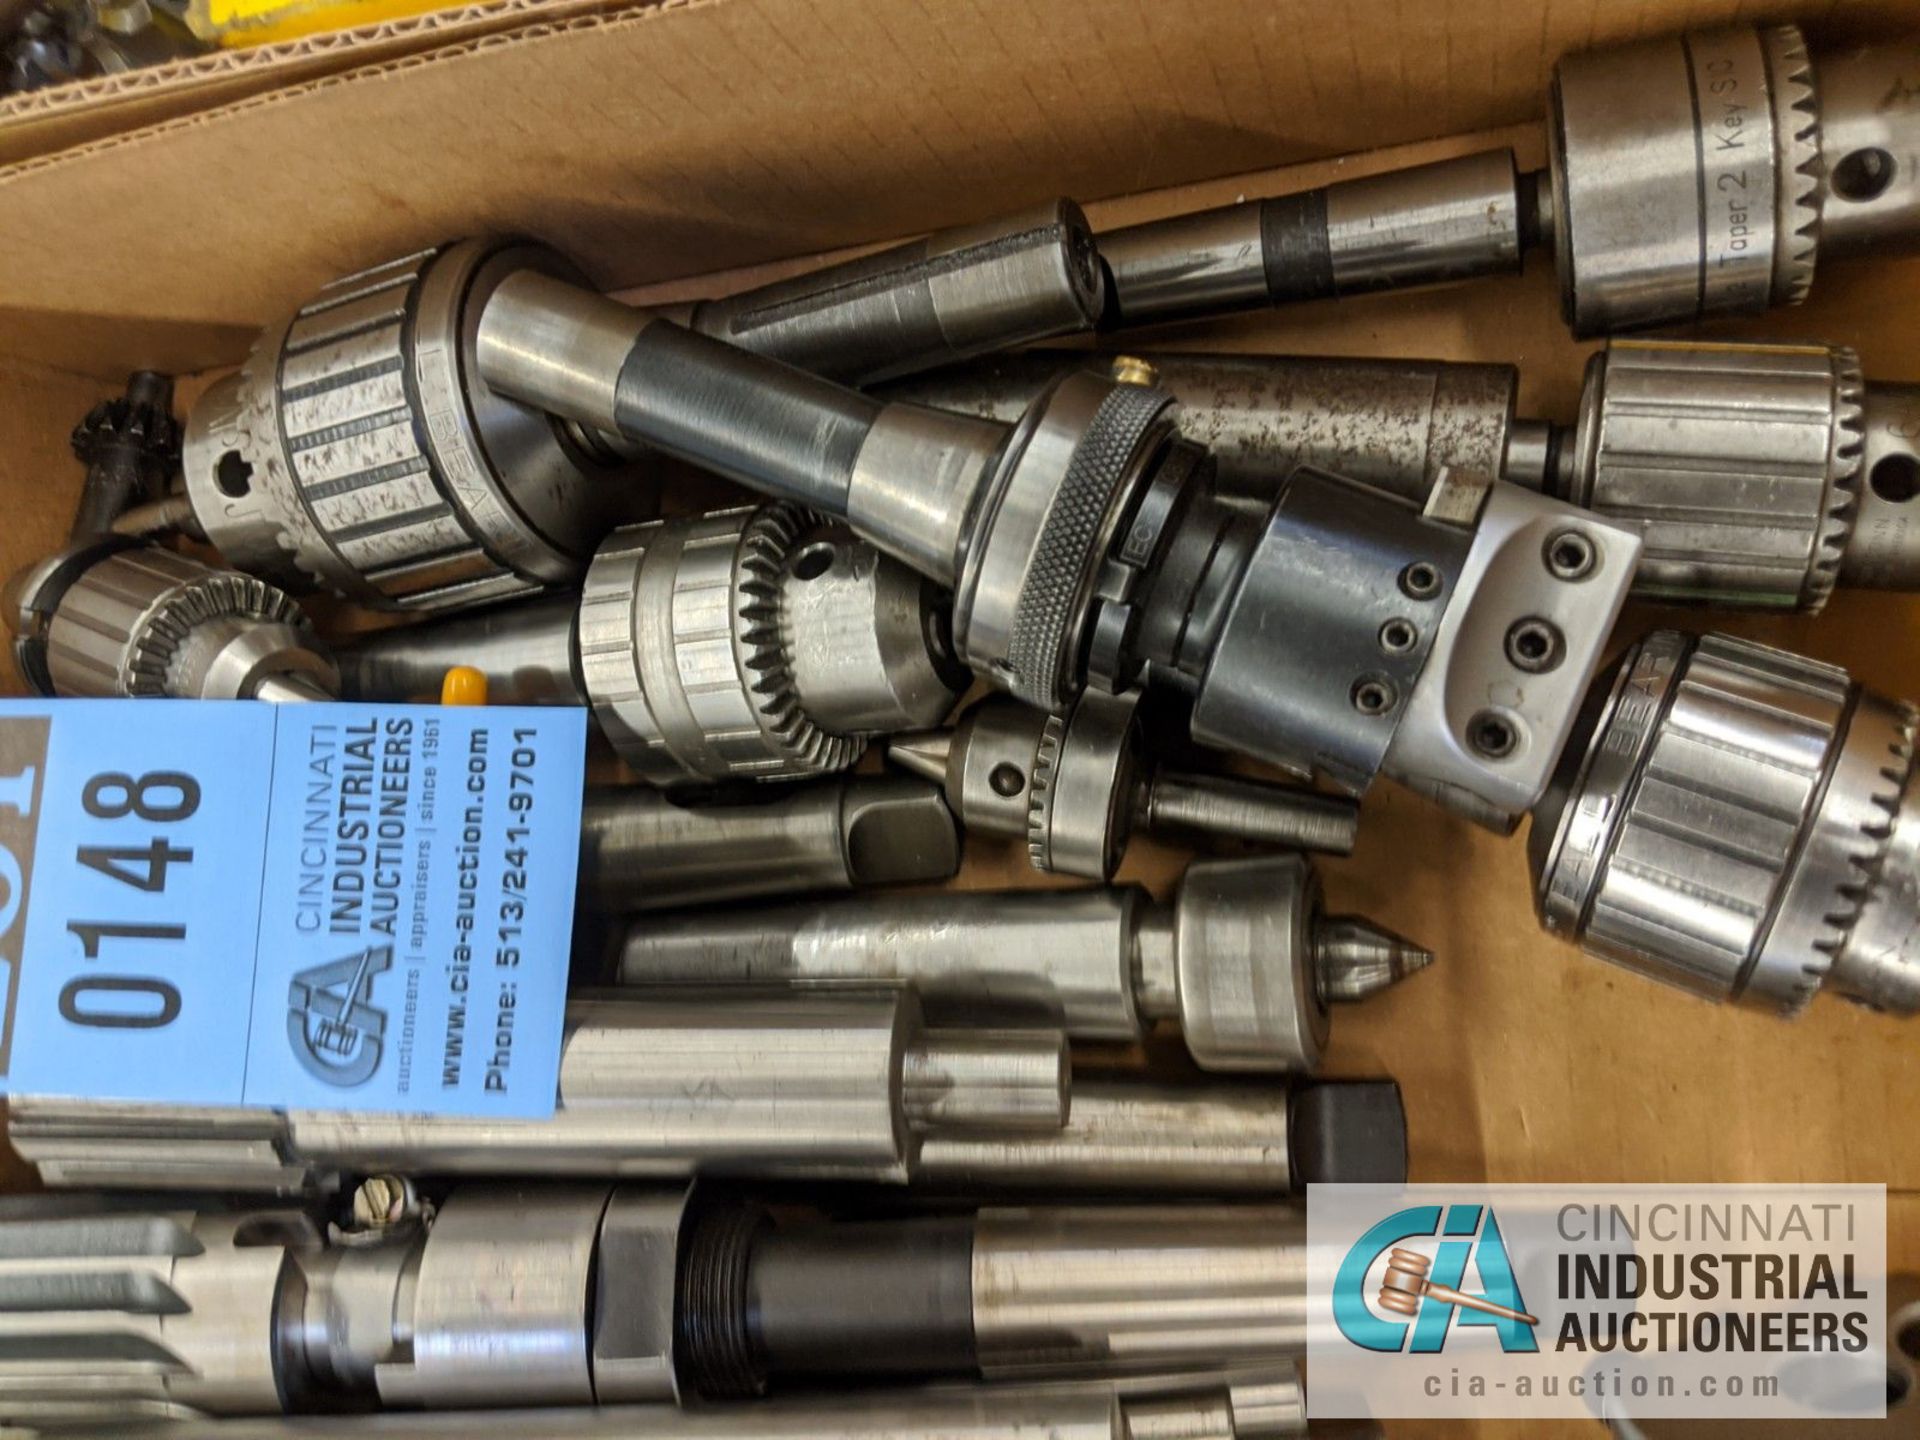 (LOT) BOX OF TOOLING; REAMERS, DRILL CHUCKS, LIVE CENTERS, ADJUSTABLE BORING HEADS - Image 2 of 4